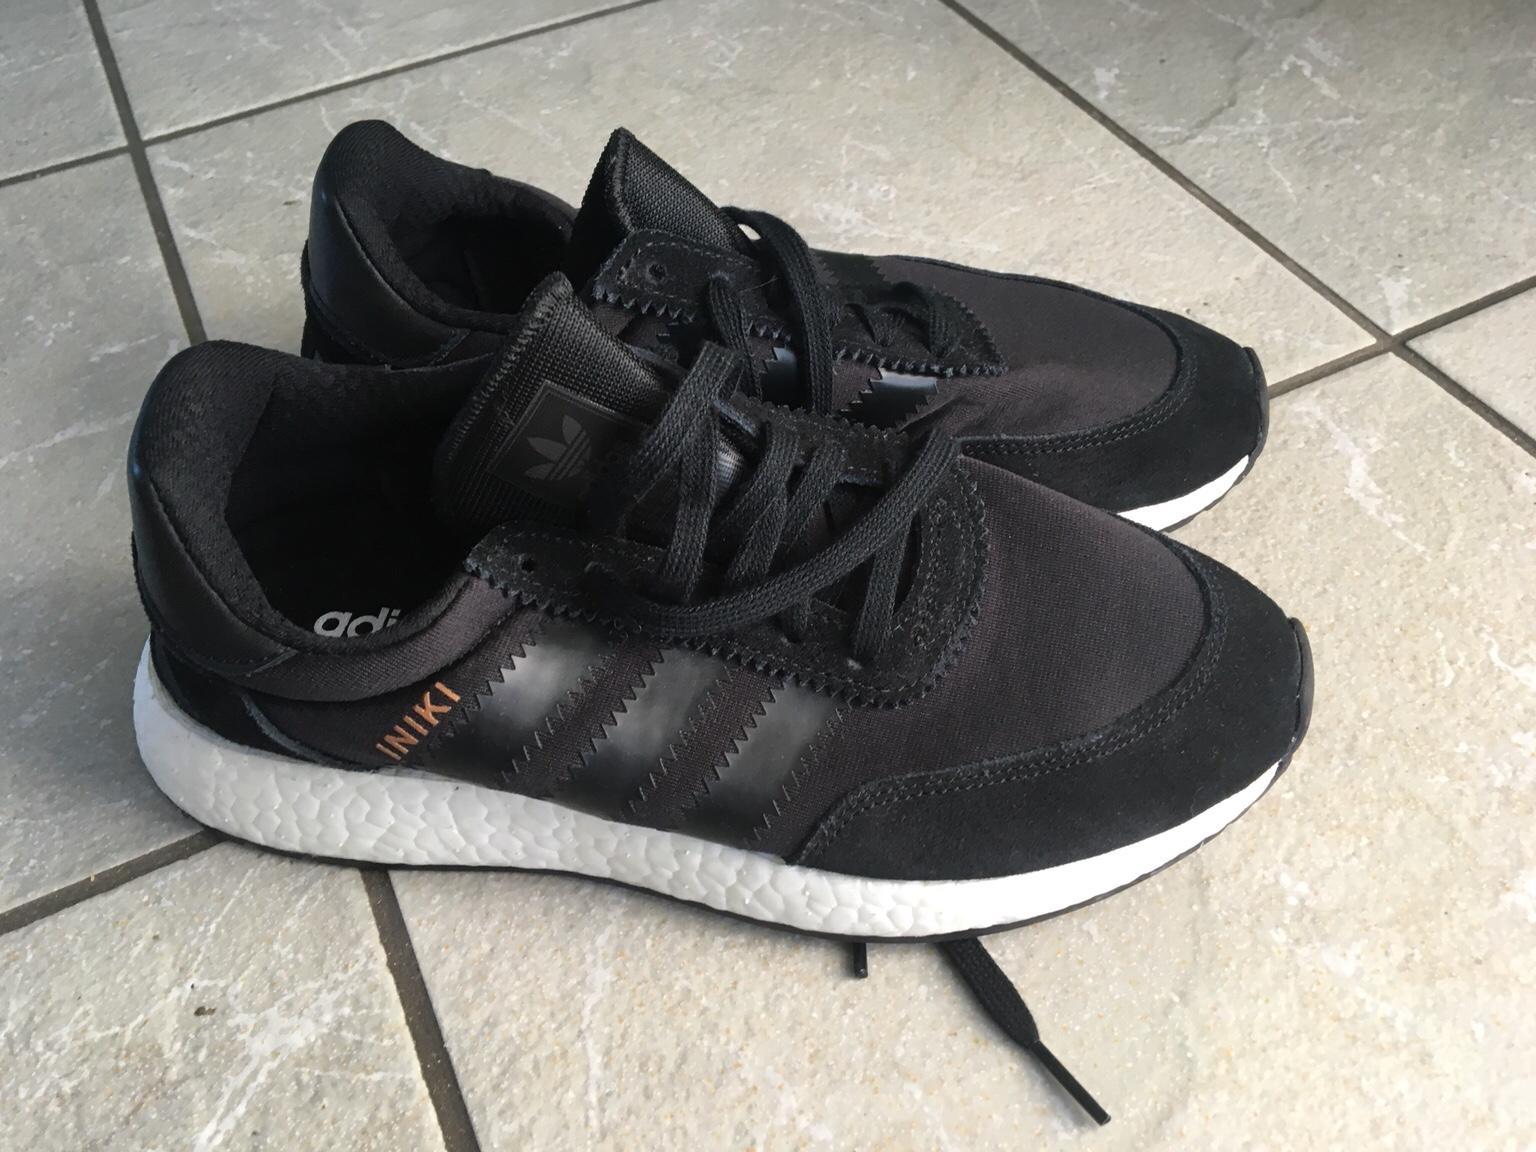 Adidas iniki n.39,5 in 14100 Asti for €60.00 for sale | Shpock